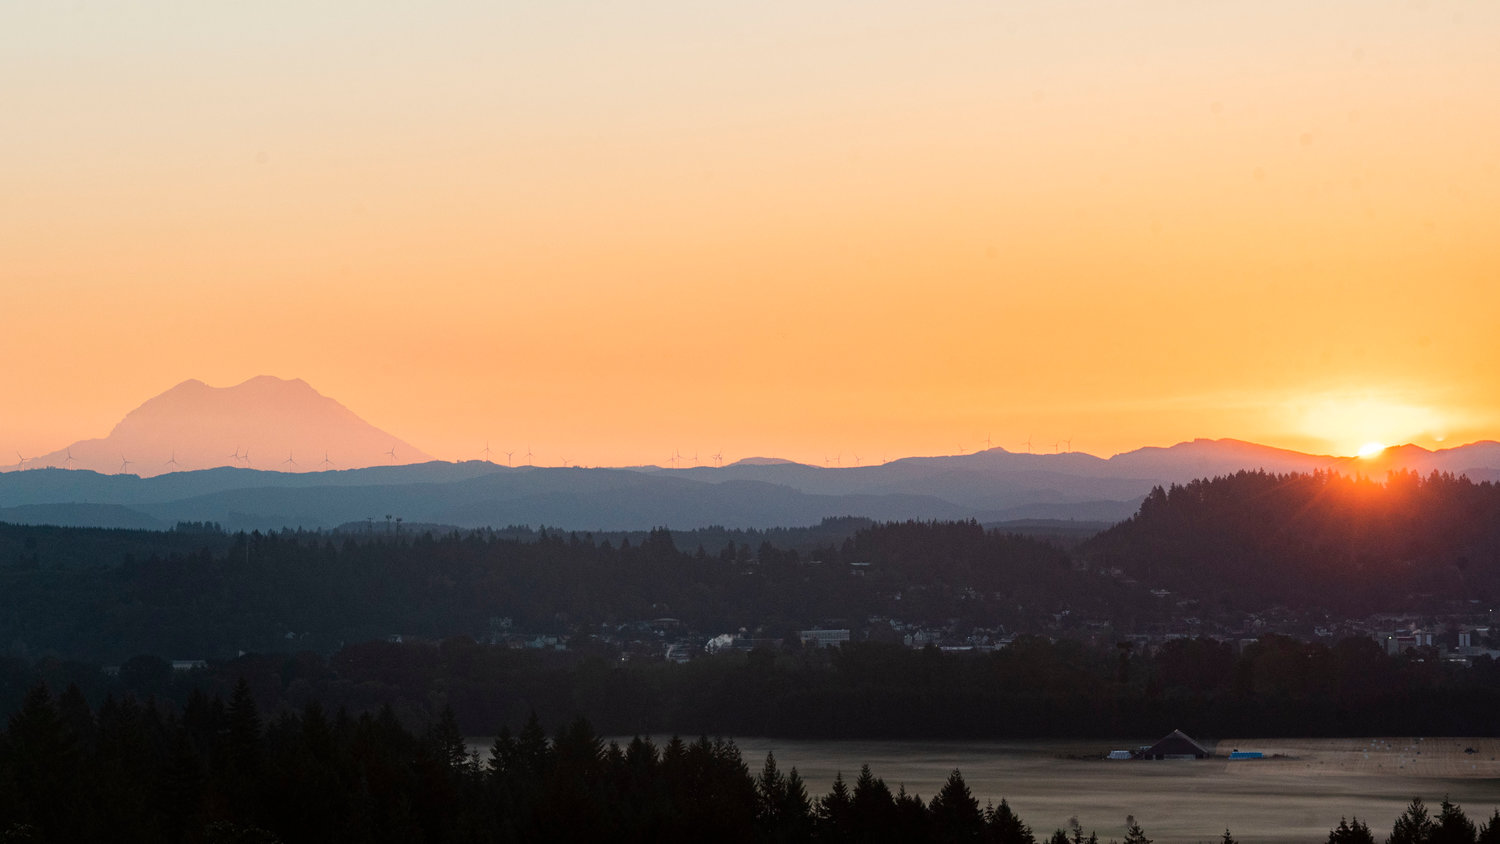 The sun rises Tuesday morning in this photograph captured from a hill west of Chehalis. Mount Rainier is pictured at left with wind turbines from the Skookumchuck Wind Project visible on the ridge